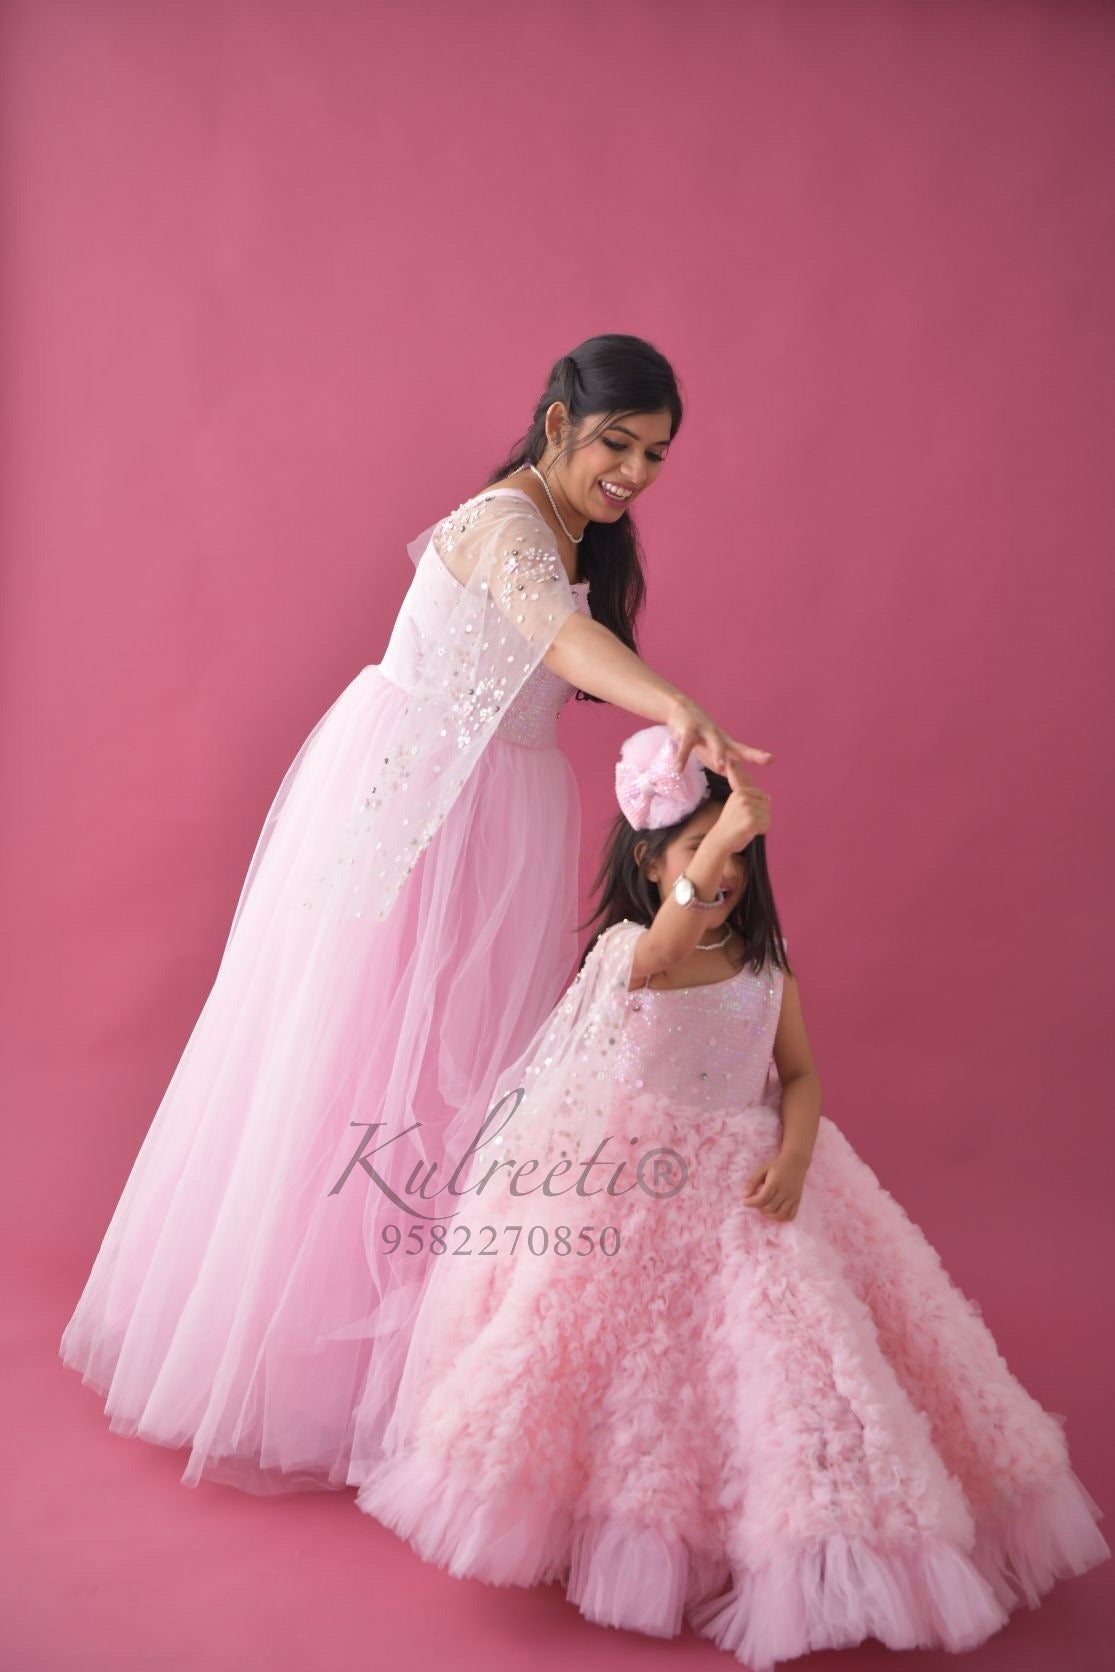 Elegant Light Pink Pink Quinceanera Ball Gown With Tiered Ruffles And Tulle  Skirt Perfect For Sweet 16, Formal Parties, Proms, And Special Occasions  From Donnaweddingdress26, $160.05 | DHgate.Com